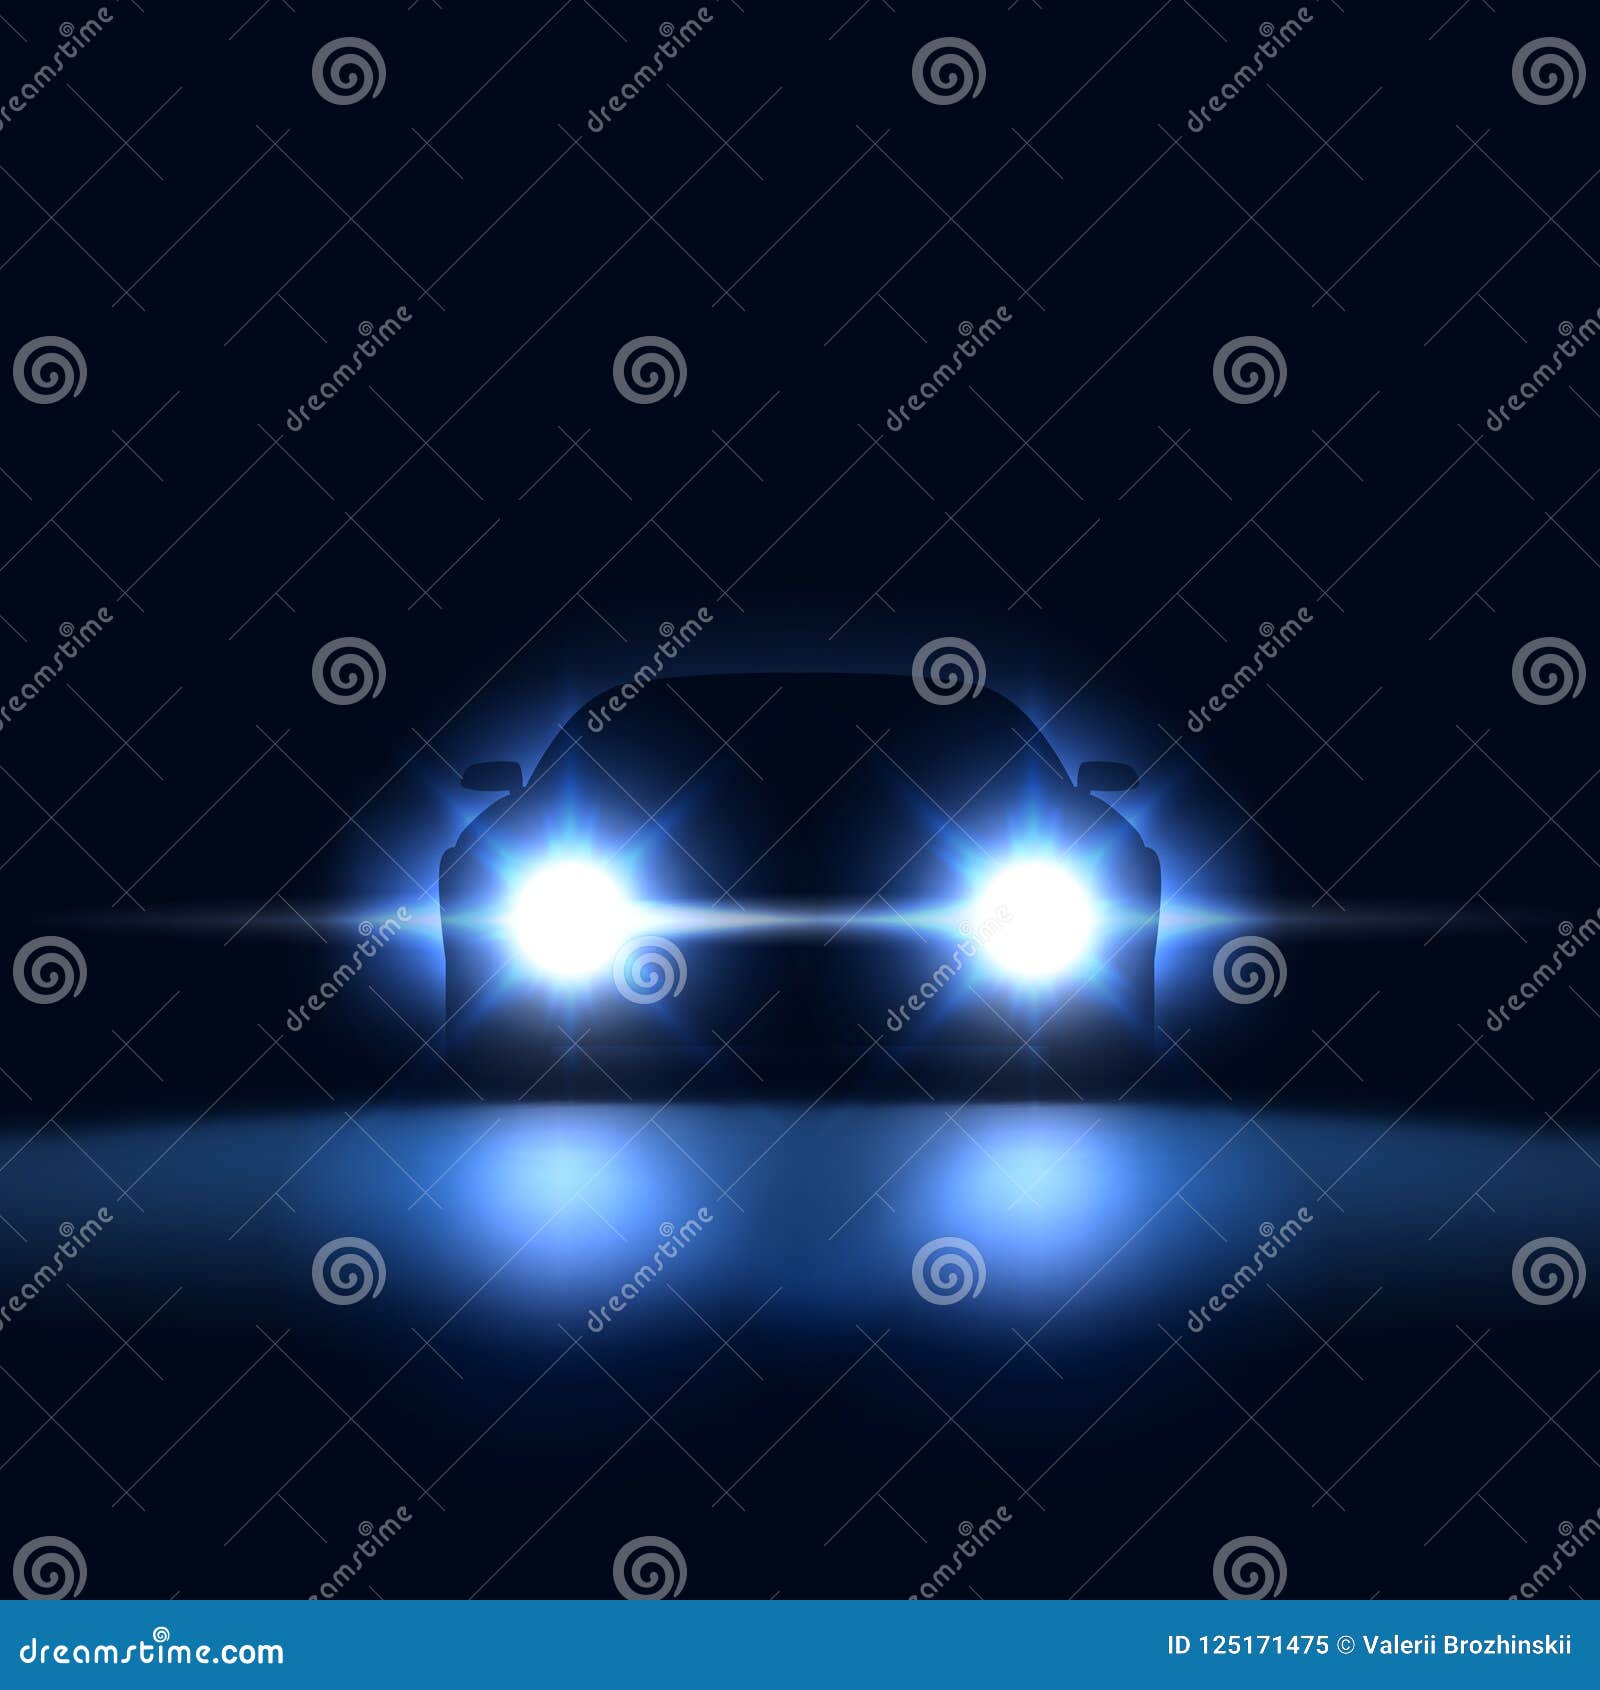 night car with bright headlights approaching in the dark, silhouette of car with xenon headlights in showroom